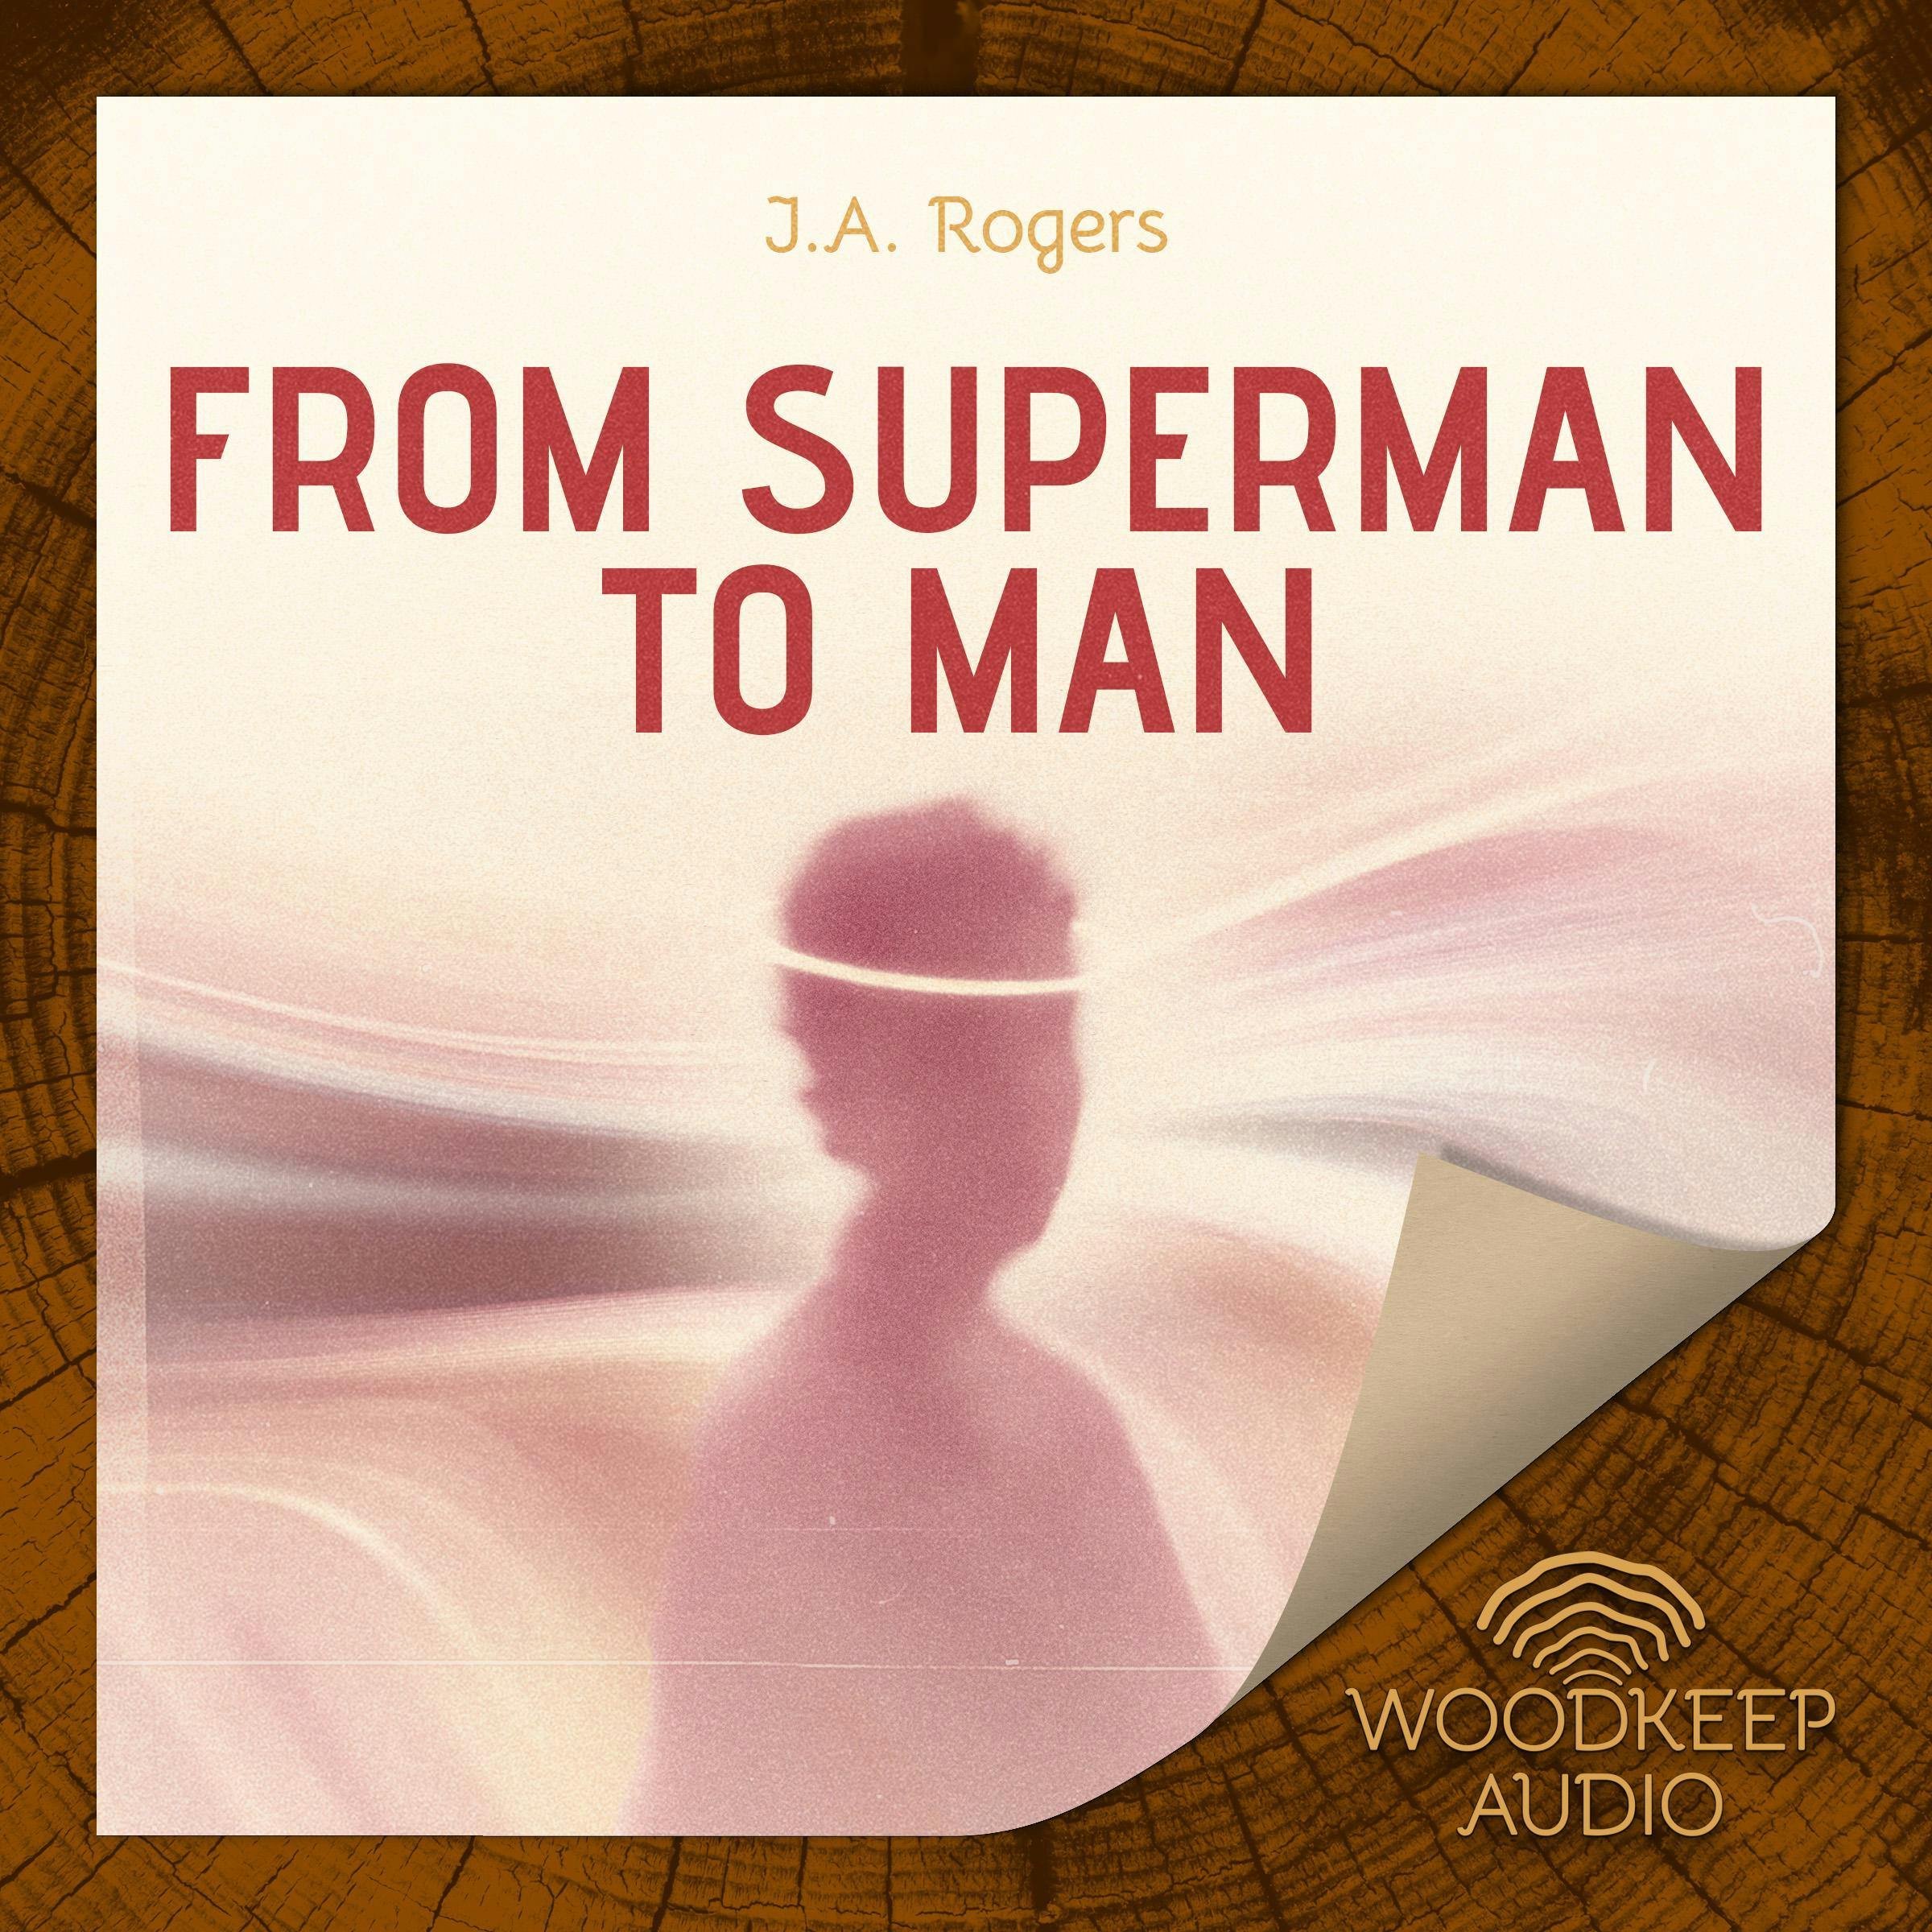 From Superman to Man - J.A. Rogers